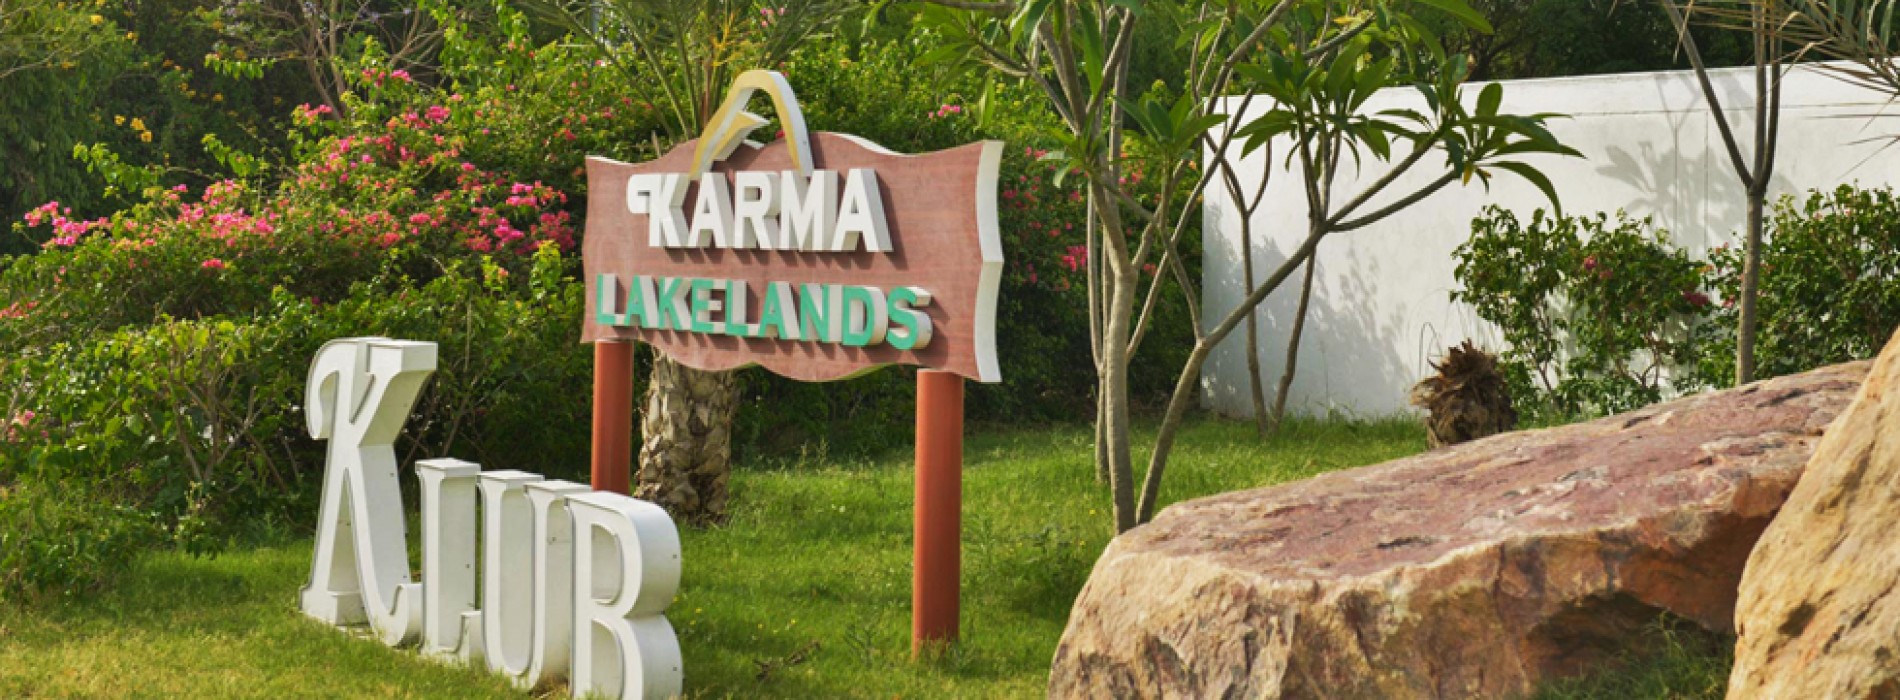 Experience a healthy lifestyle, filled with excitement & activities for everyone at Karma Lakelands